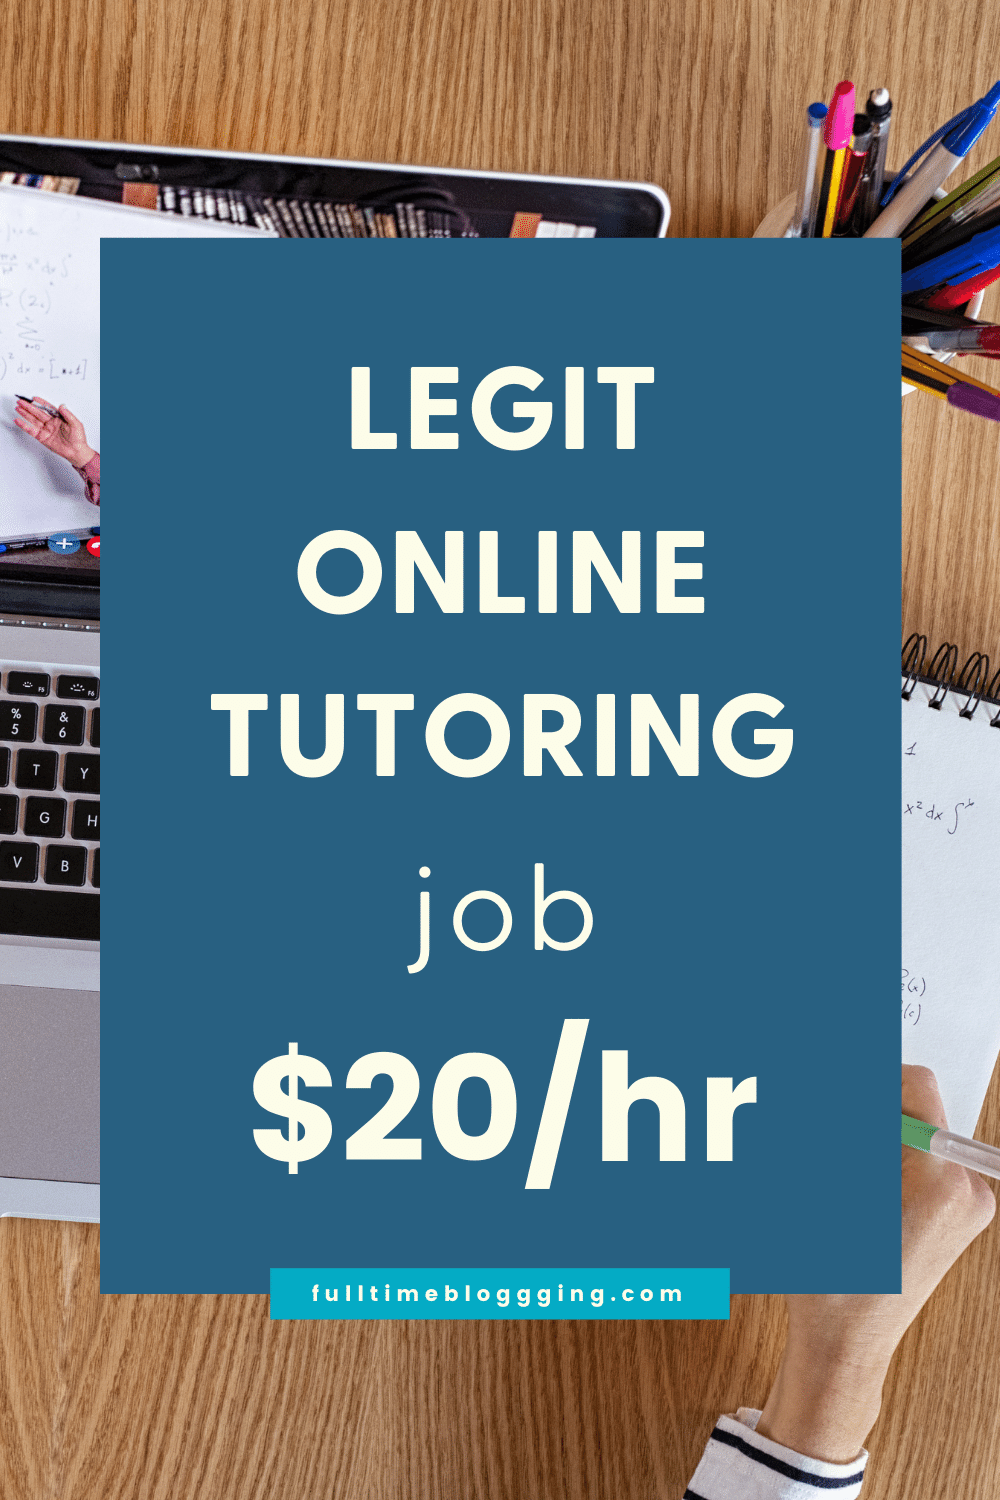 About Chegg Tutoring Jobs